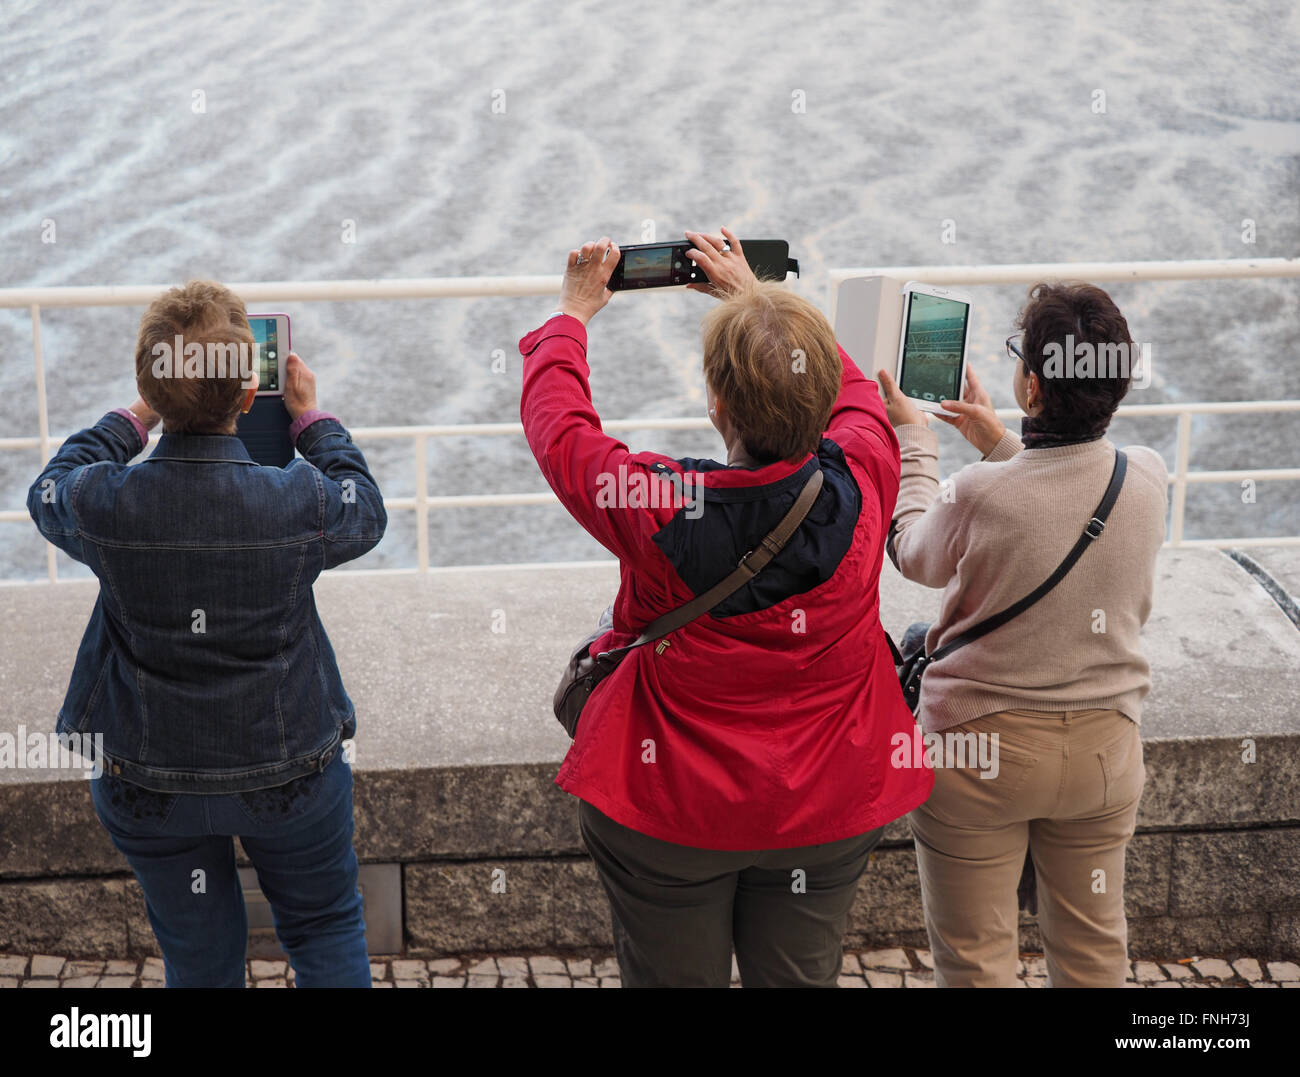 Three middle-aged women taking pictures with their mobile devices Stock Photo